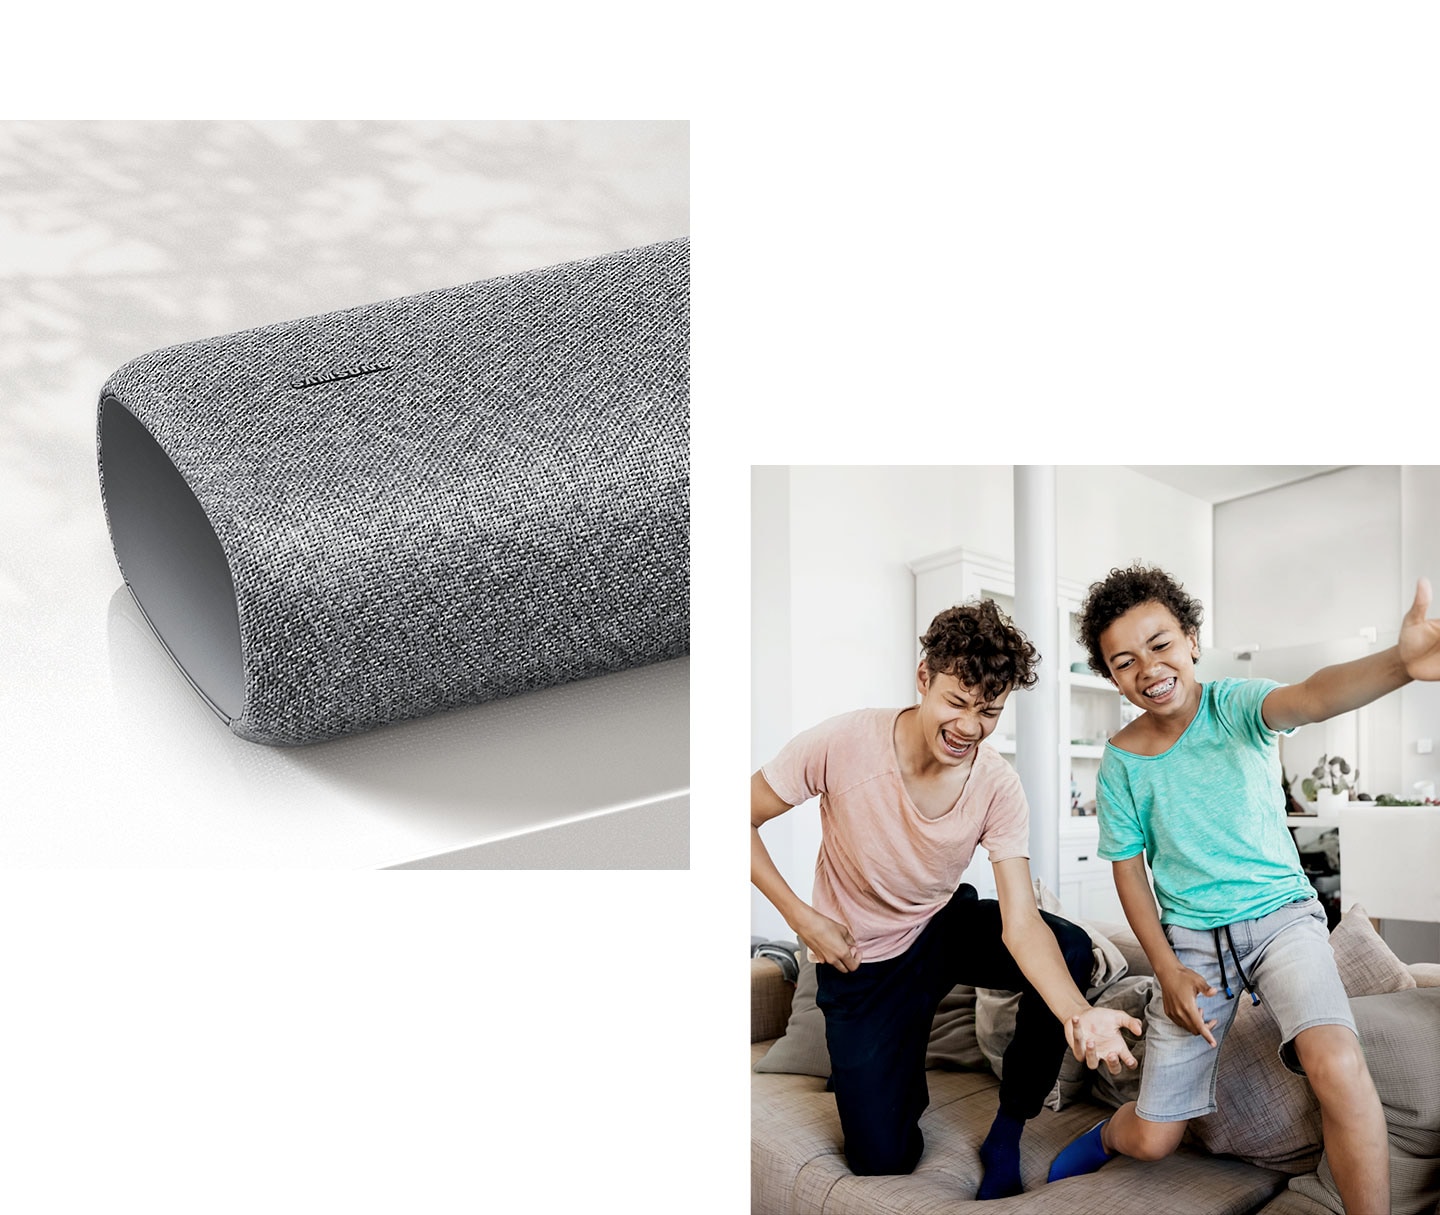 A combination of product and lifestyle images demonstrates how the S50A soundbar’s All-in-one design aesthetics blend into any room environment.